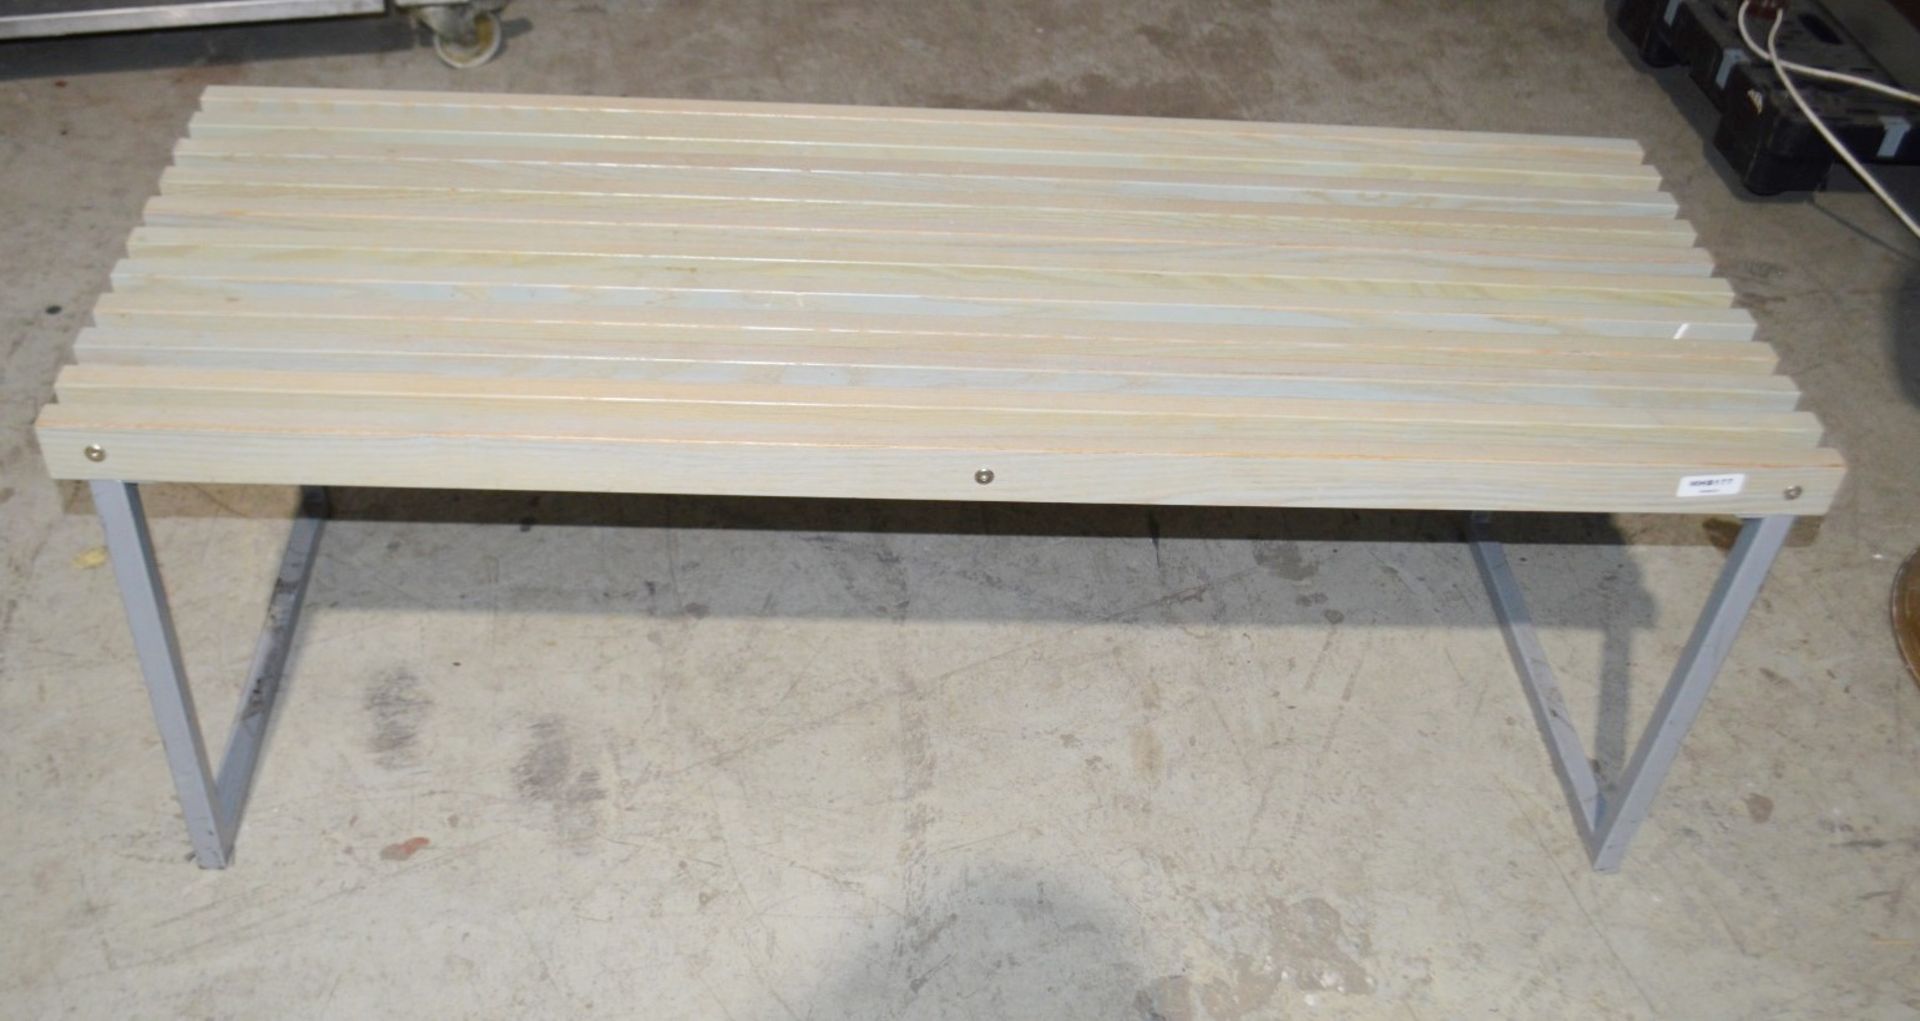 1 x Department Store Bench With Wooden Beams In A Limed Oak Finish - Dimensions: W135 x D50 x - Image 4 of 4